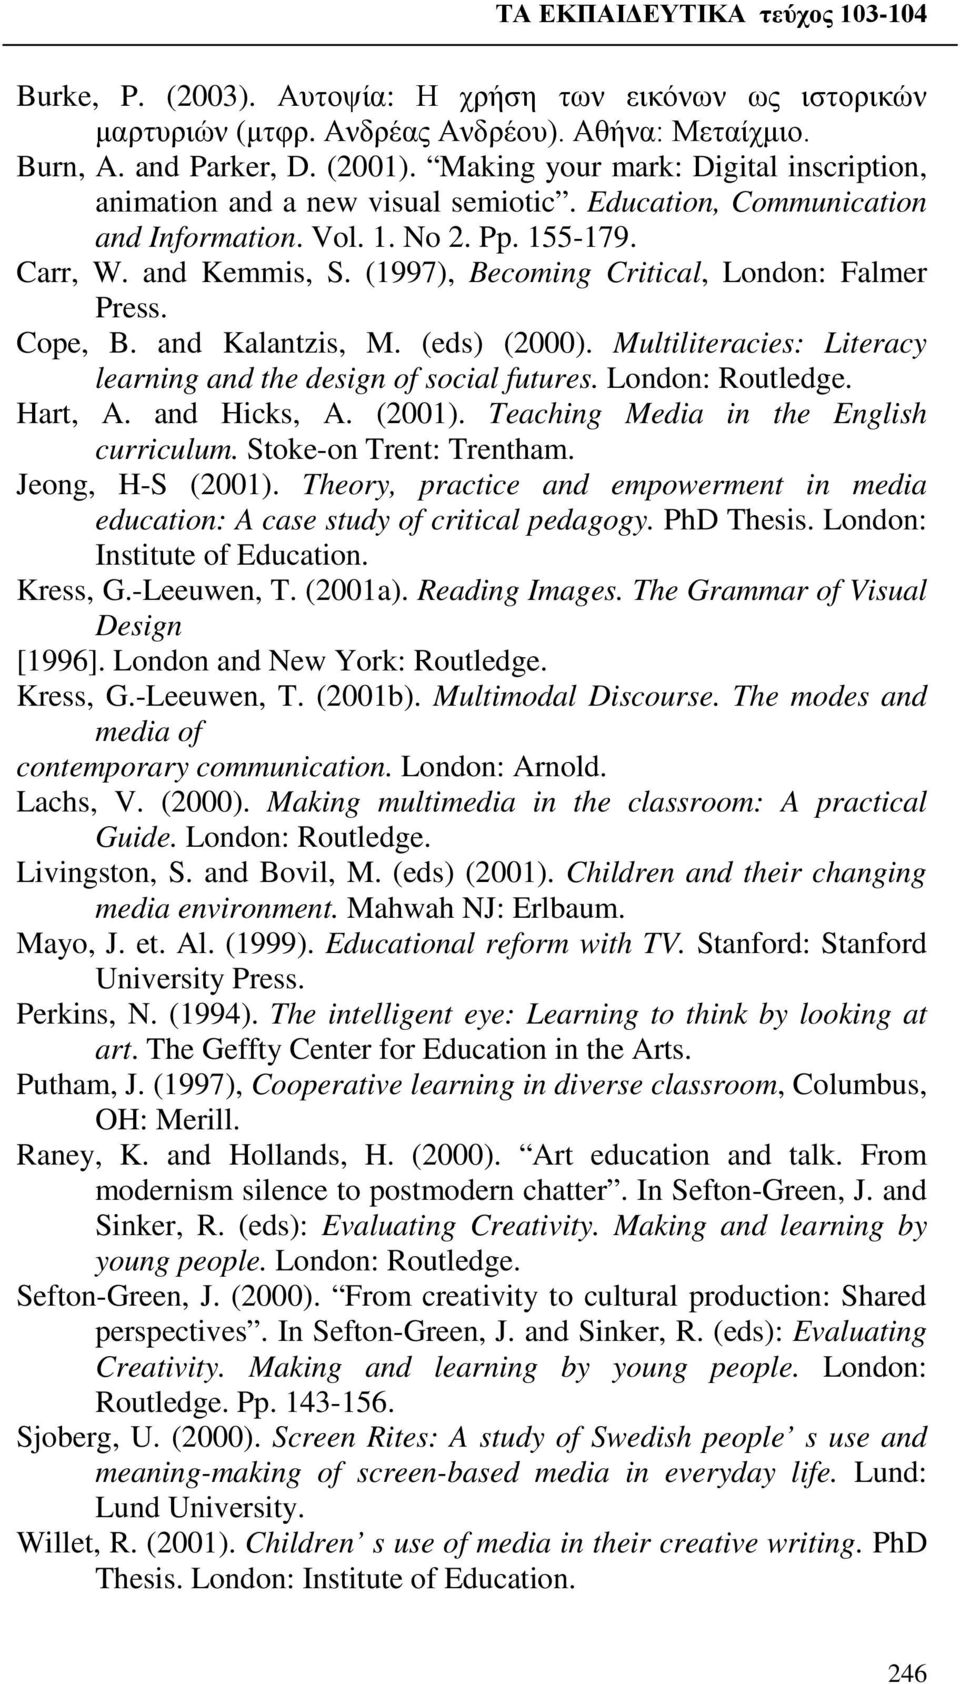 (1997), Becoming Critical, London: Falmer Press. Cope, B. and Kalantzis, M. (eds) (2000). Multiliteracies: Literacy learning and the design of social futures. London: Routledge. Hart, A. and Hicks, A.